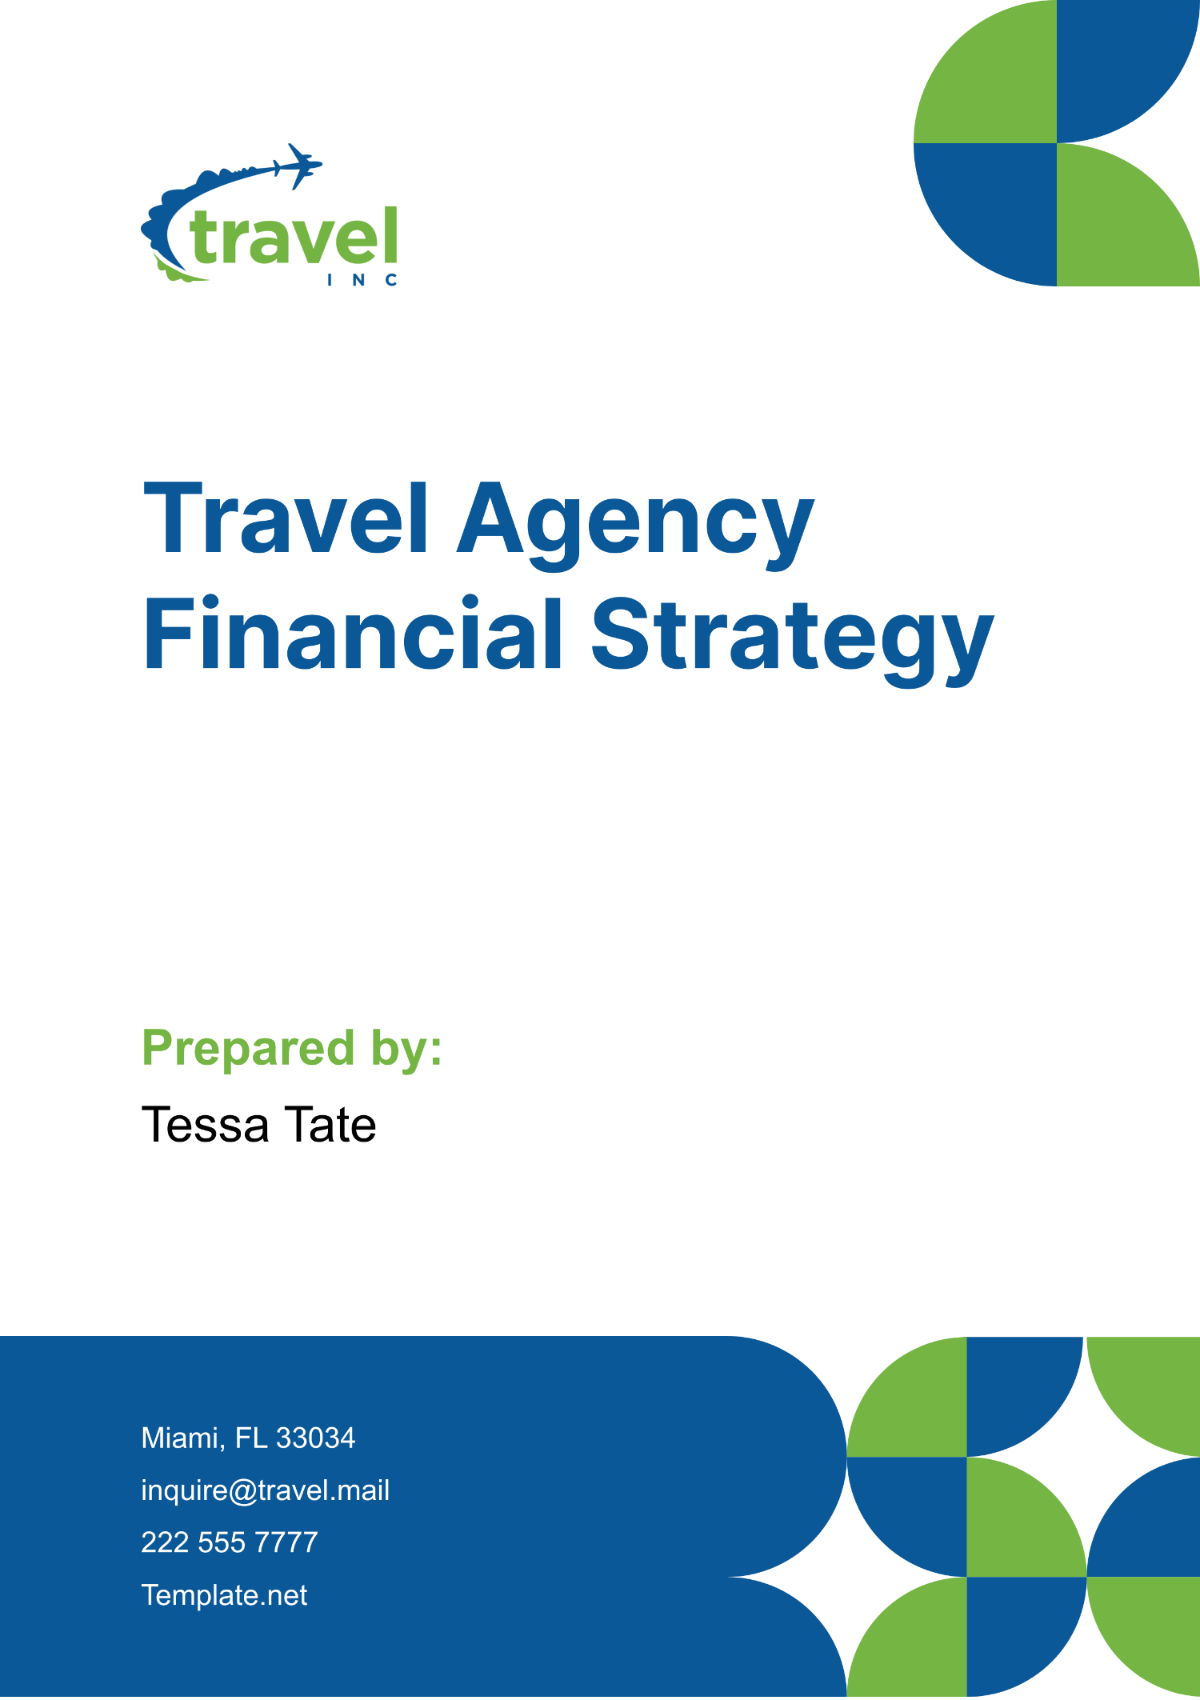 Travel Agency Financial Strategy Template